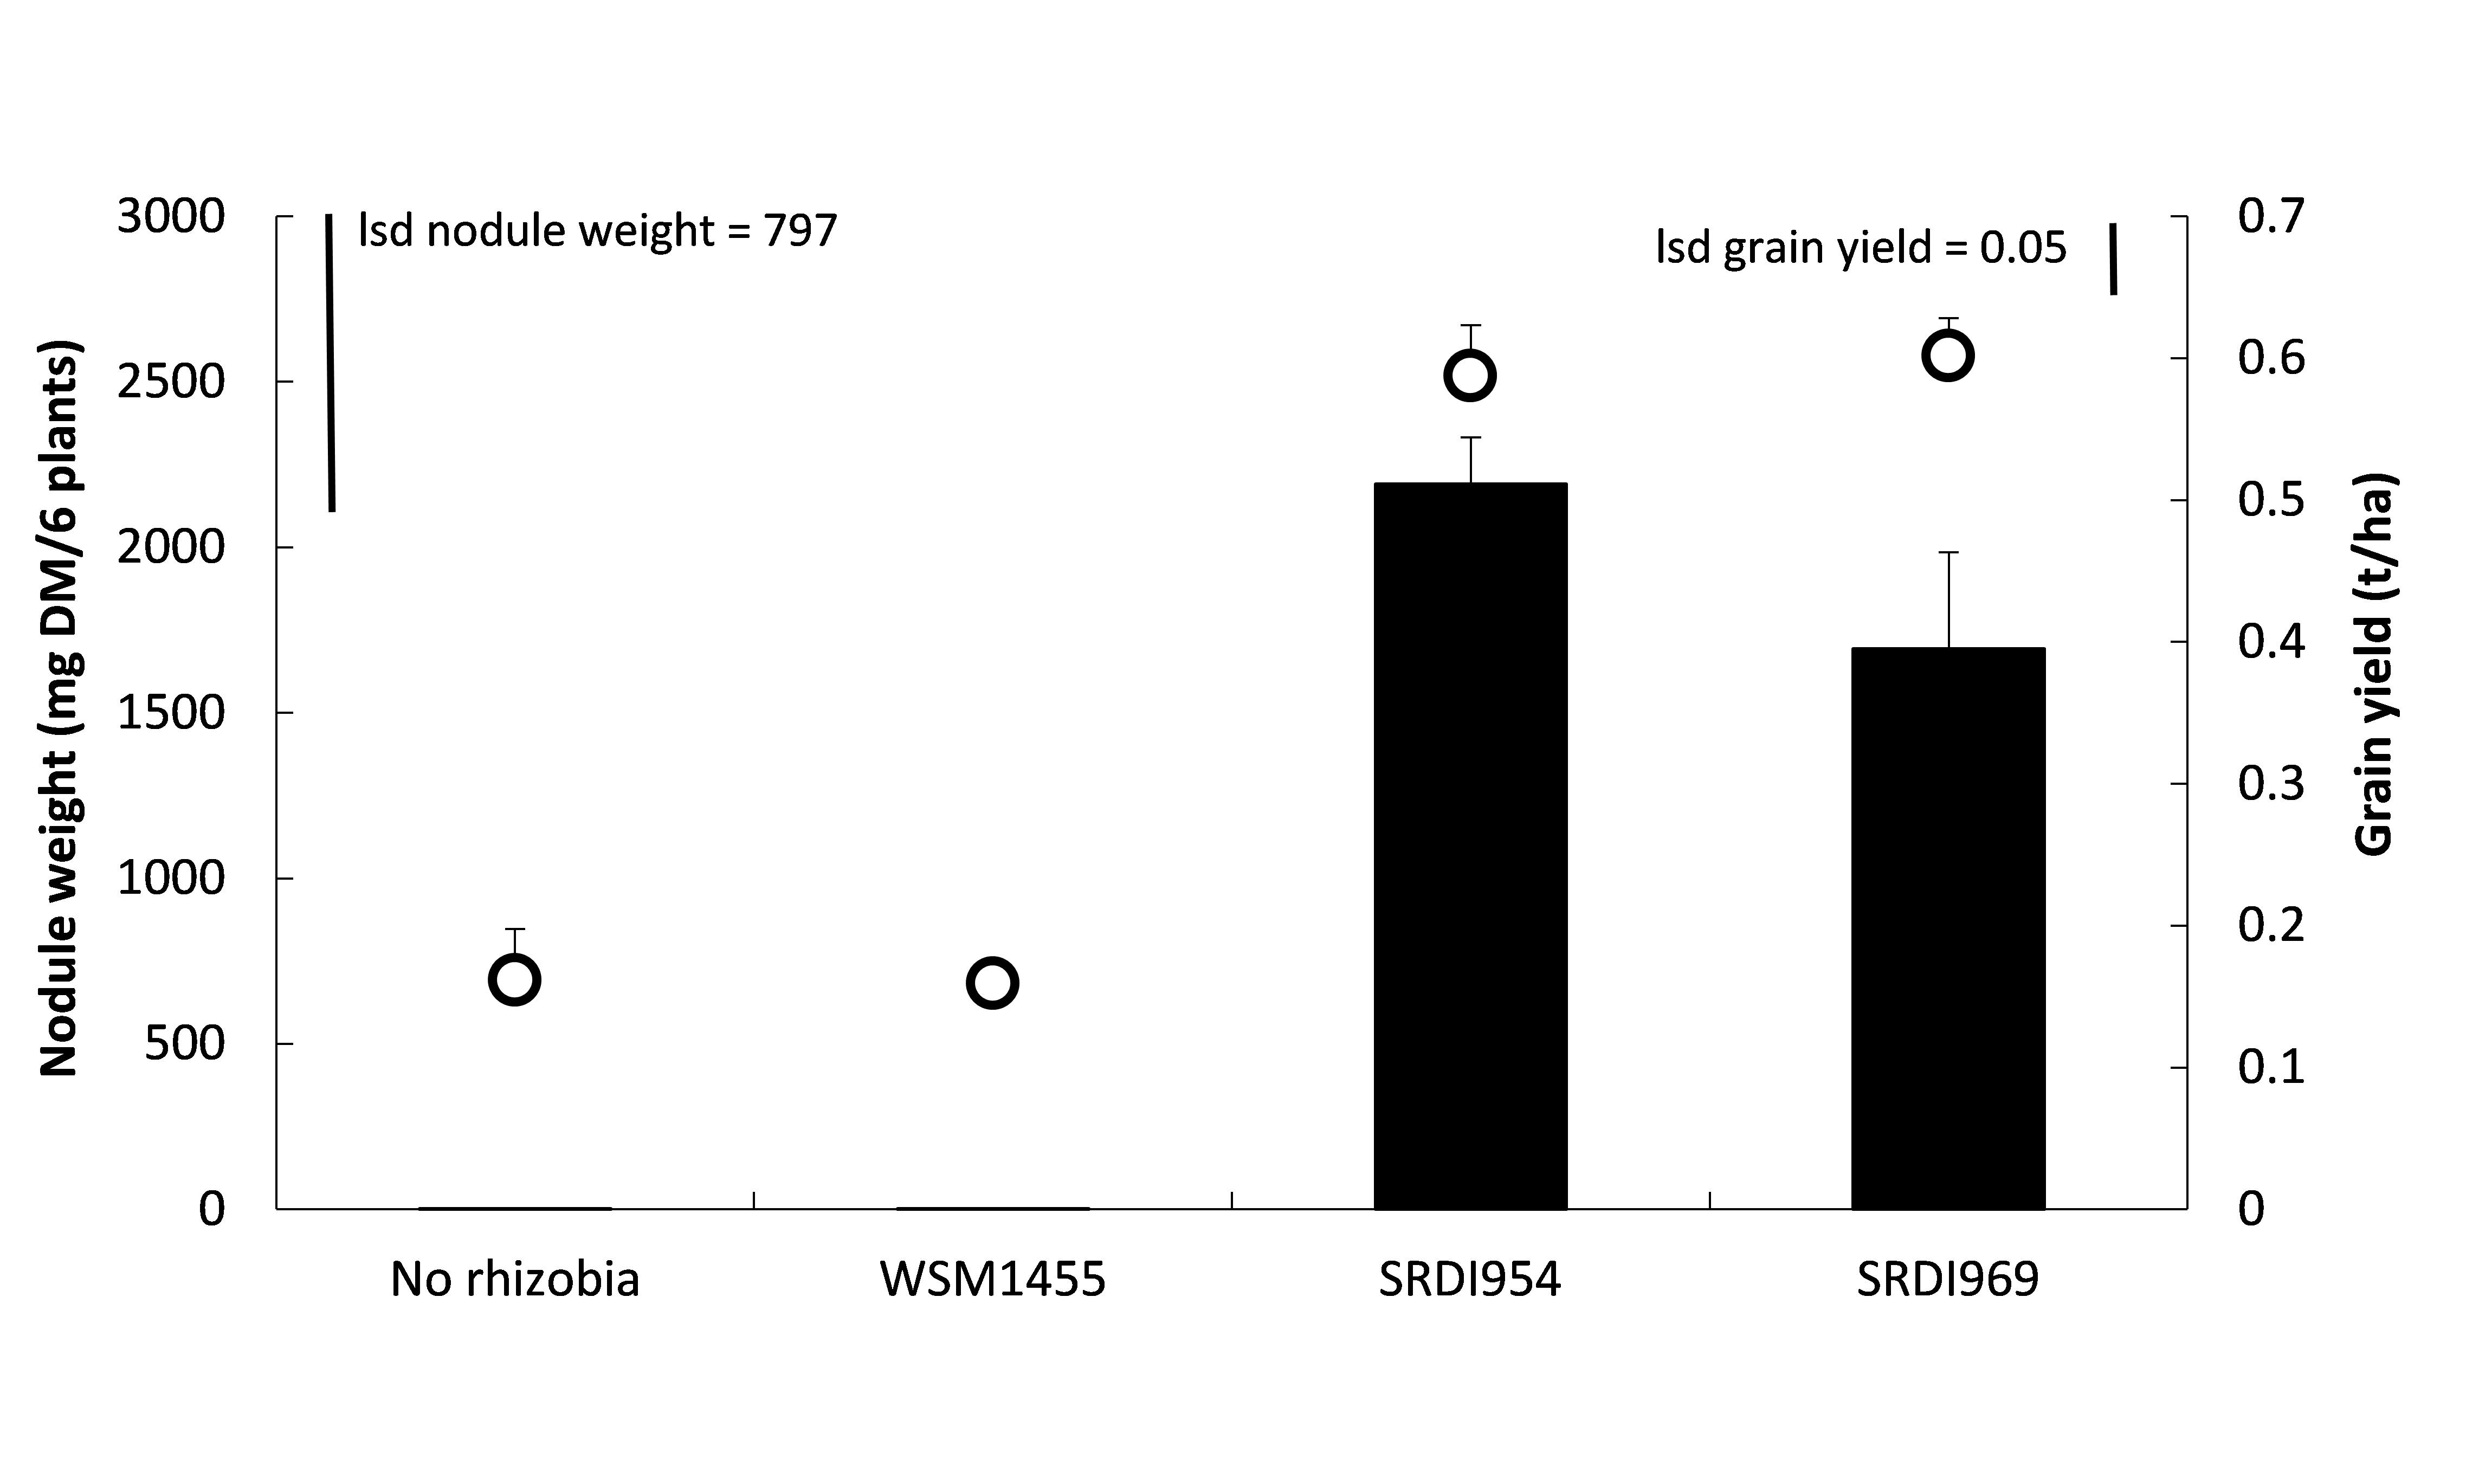 Figure 5. Effect of rhizobia strain on nodule weight (left axis, columns) and grain yield (right axis, circles) of Samira faba bean at Wanilla, Eyre Peninsula SA in 2017. Site pH(Ca) = 4.3, sown into dry soil at standard rates of inoculation on 28 April. Standard error of means shown as bars above columns and circles.